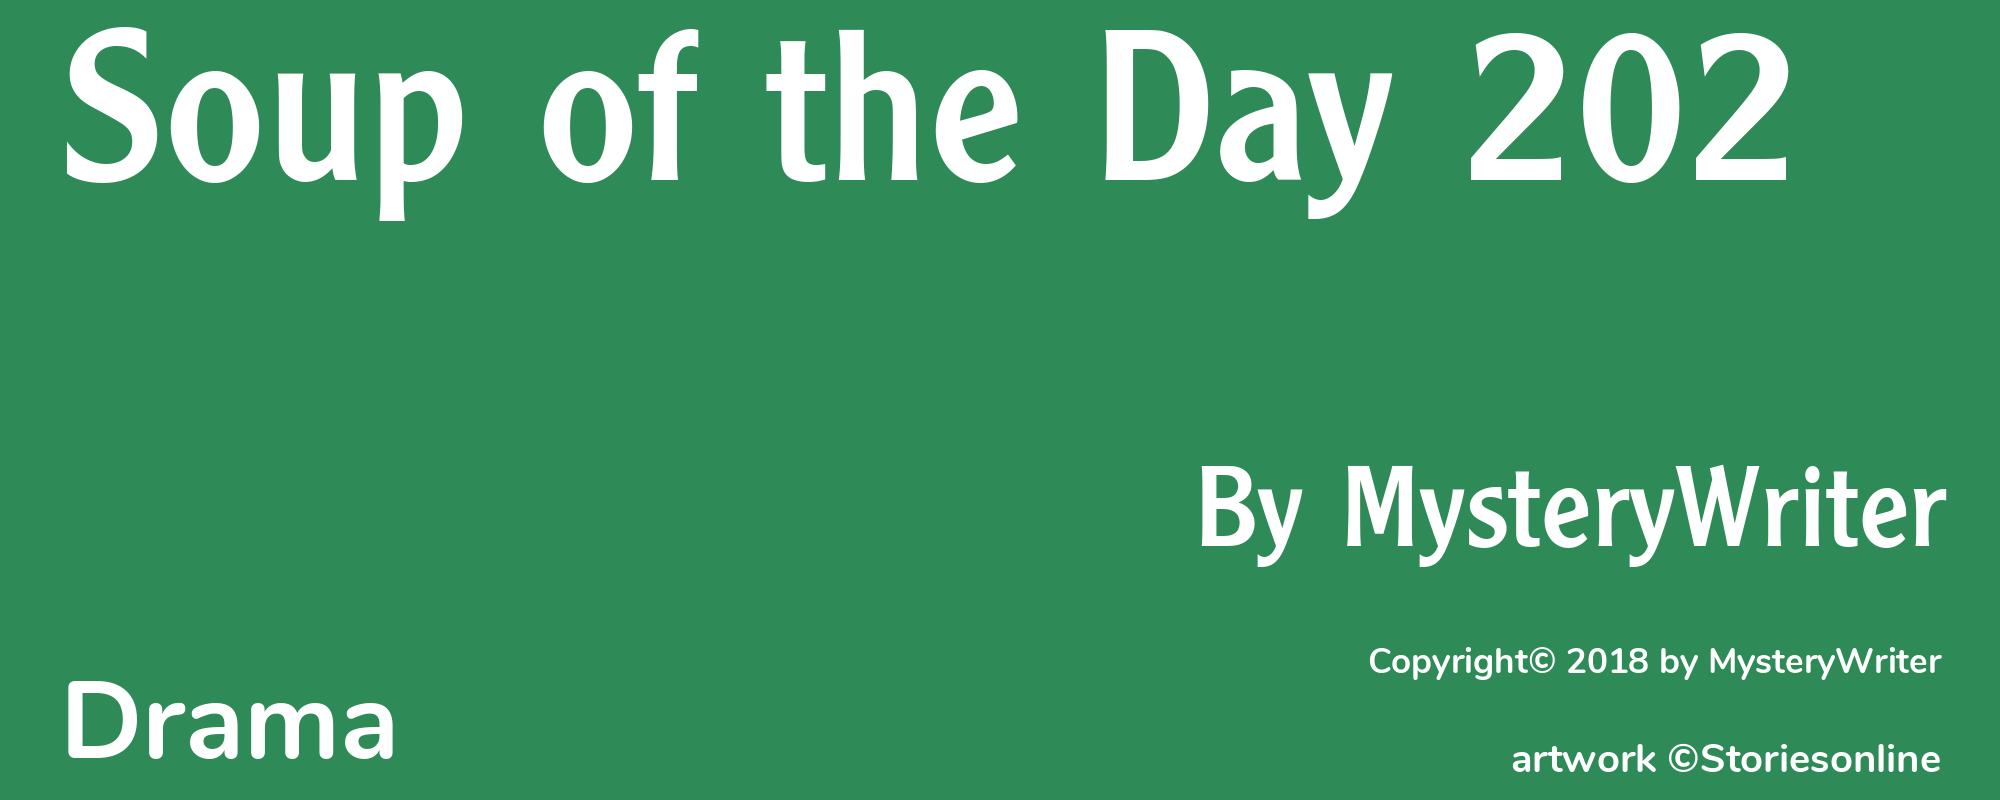 Soup of the Day 202 - Cover